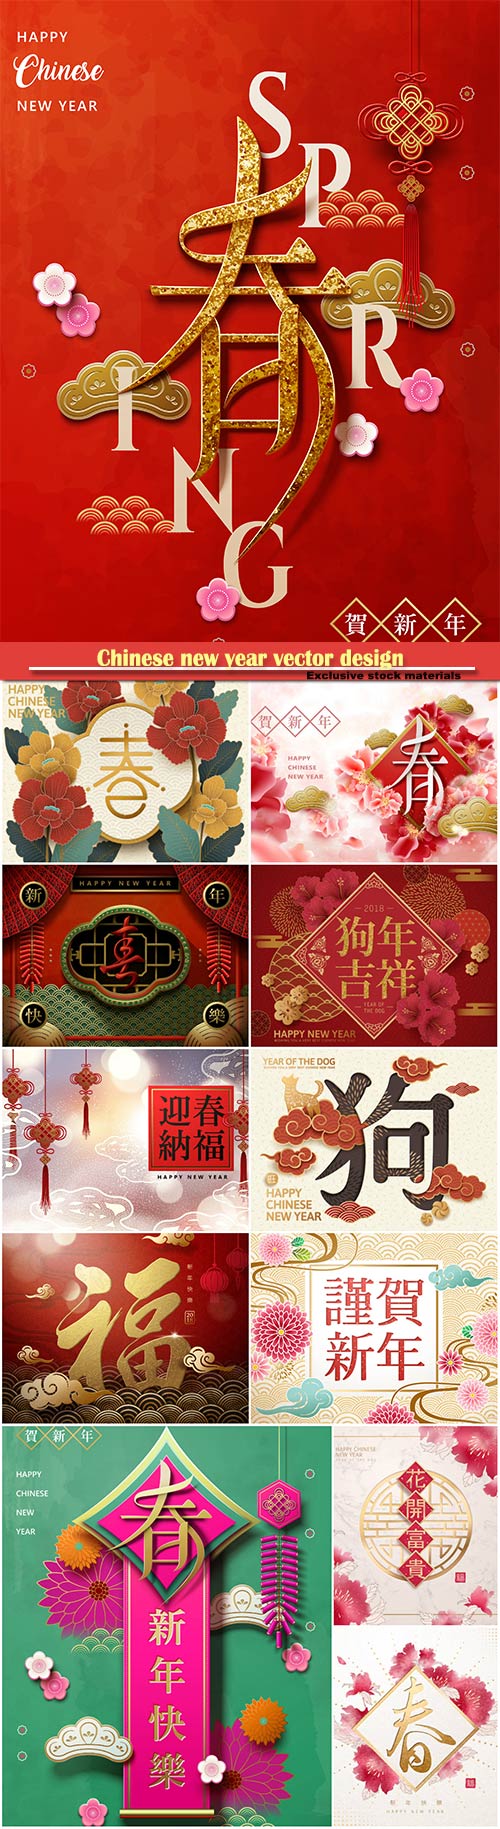 Attractive Chinese new year vector design